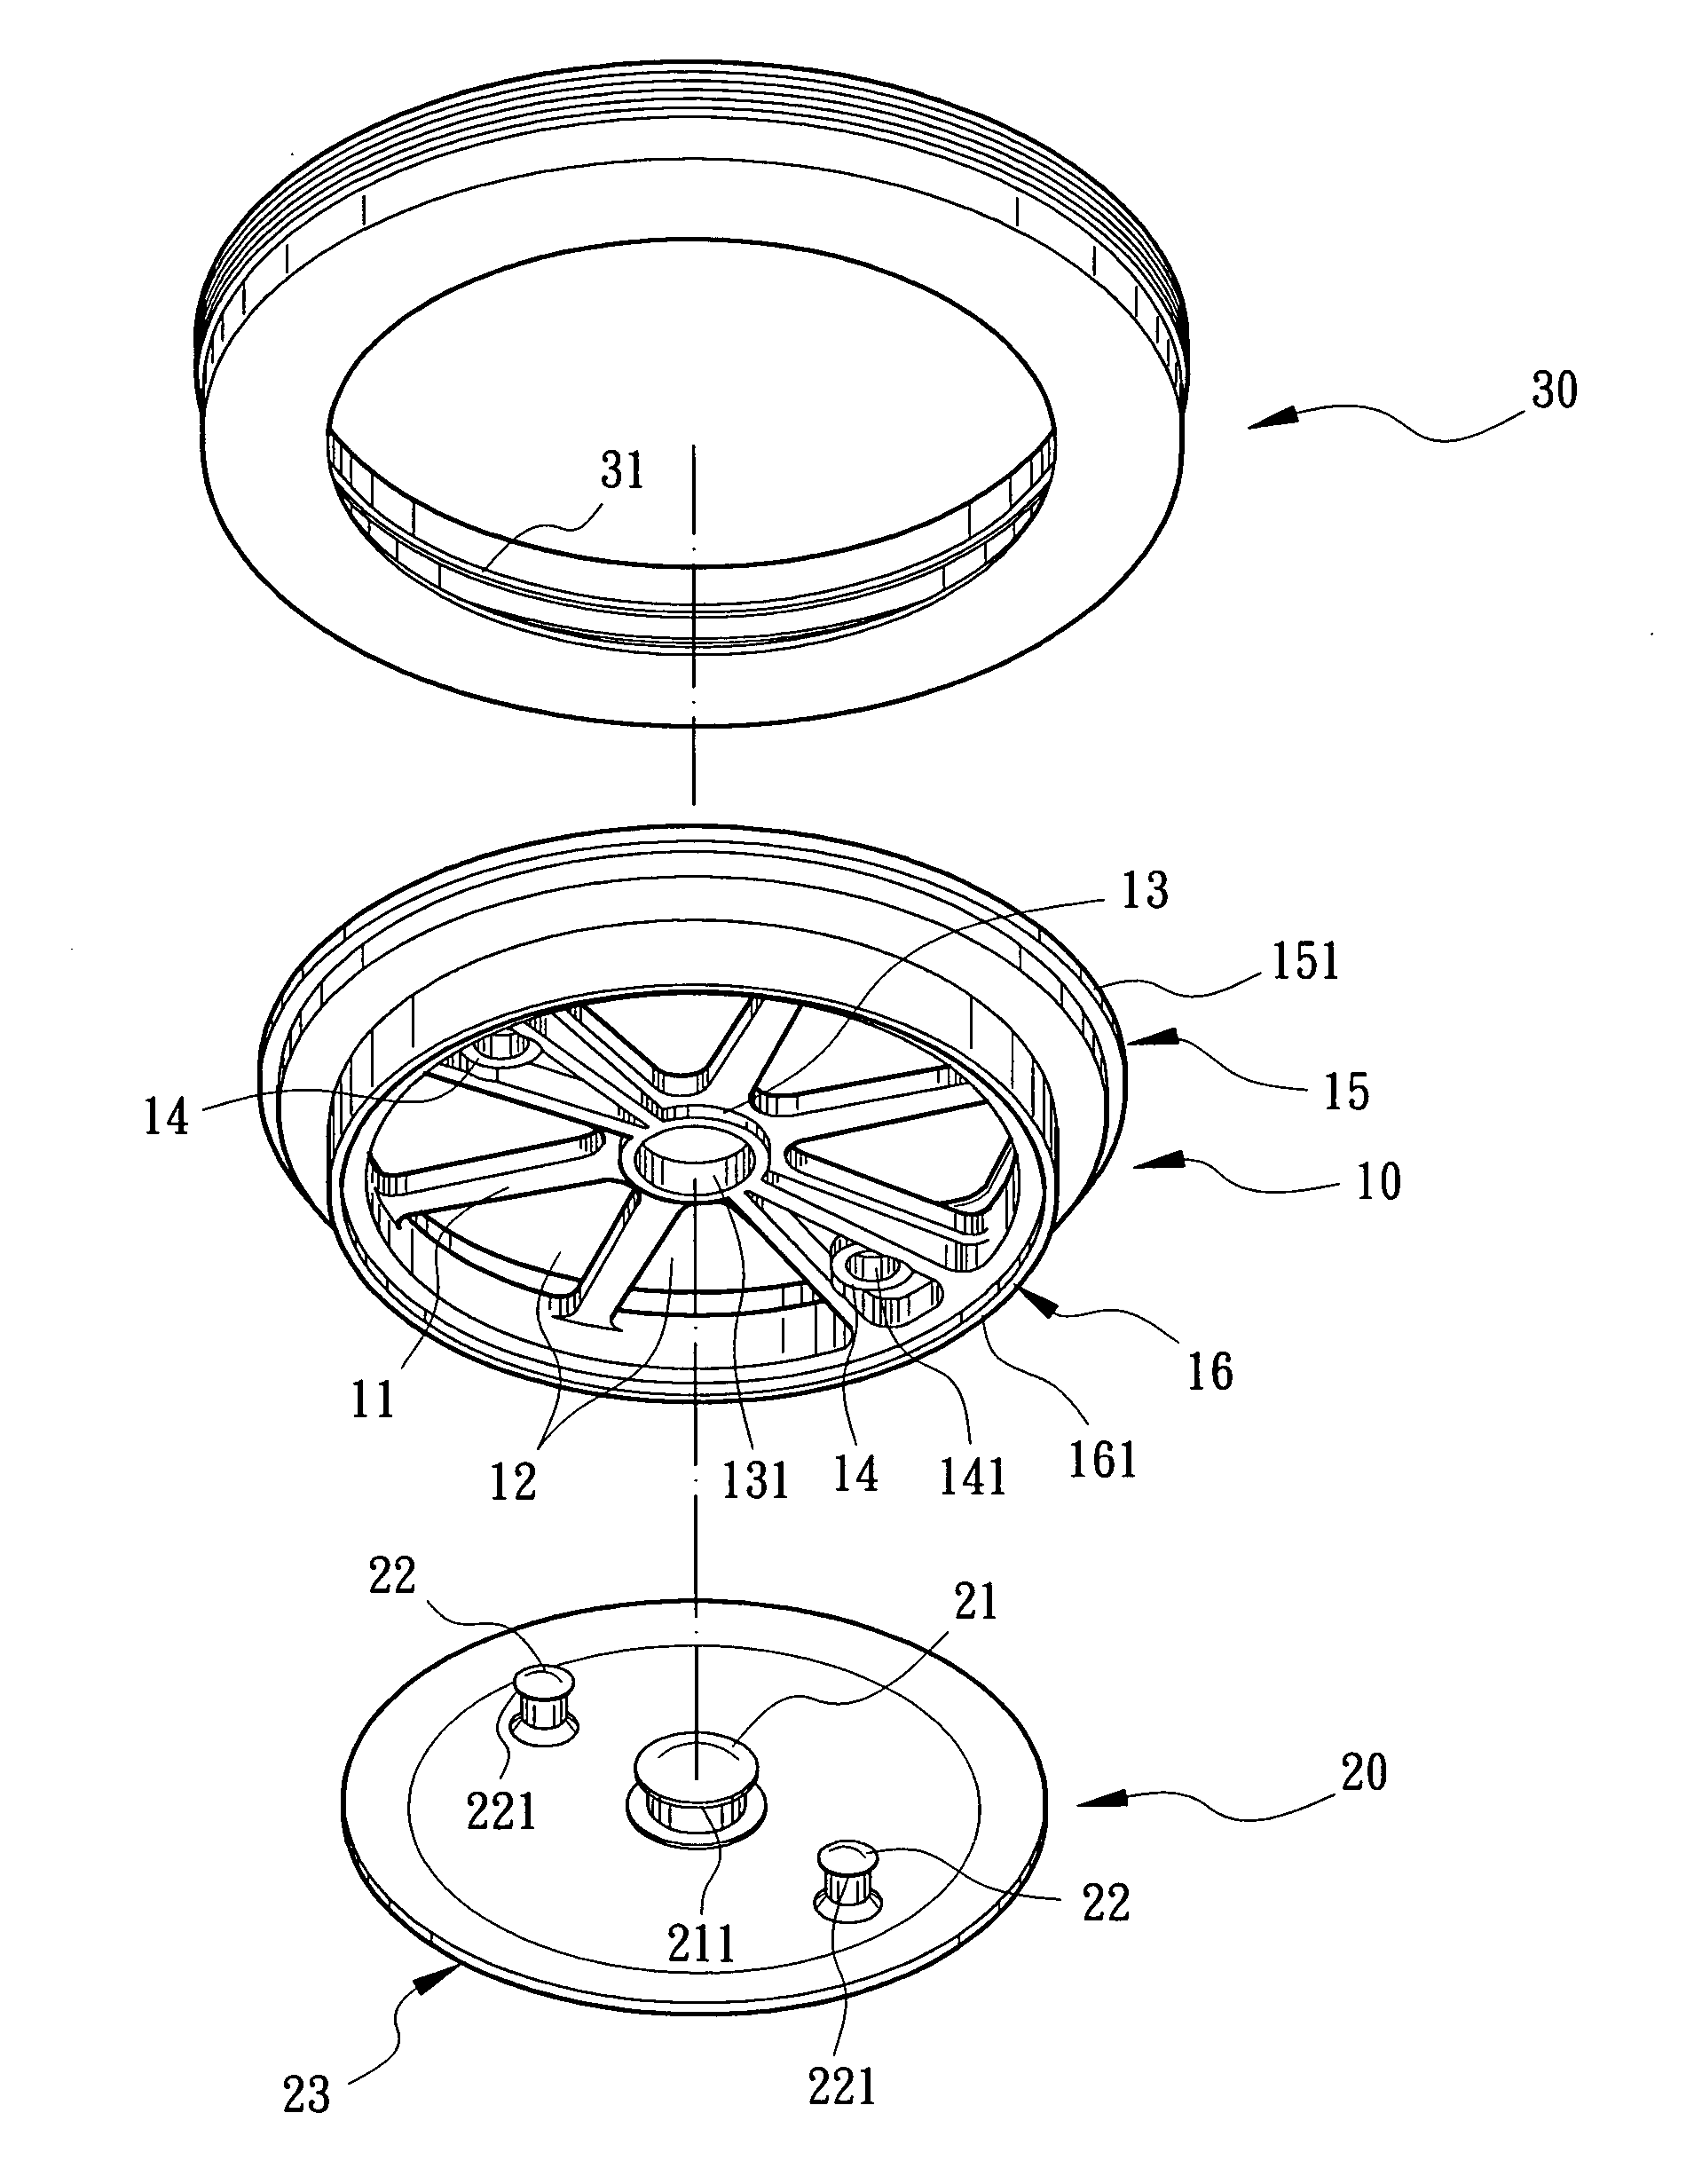 Bugproof and odorproof sealing ring structure of a sinkhole screen